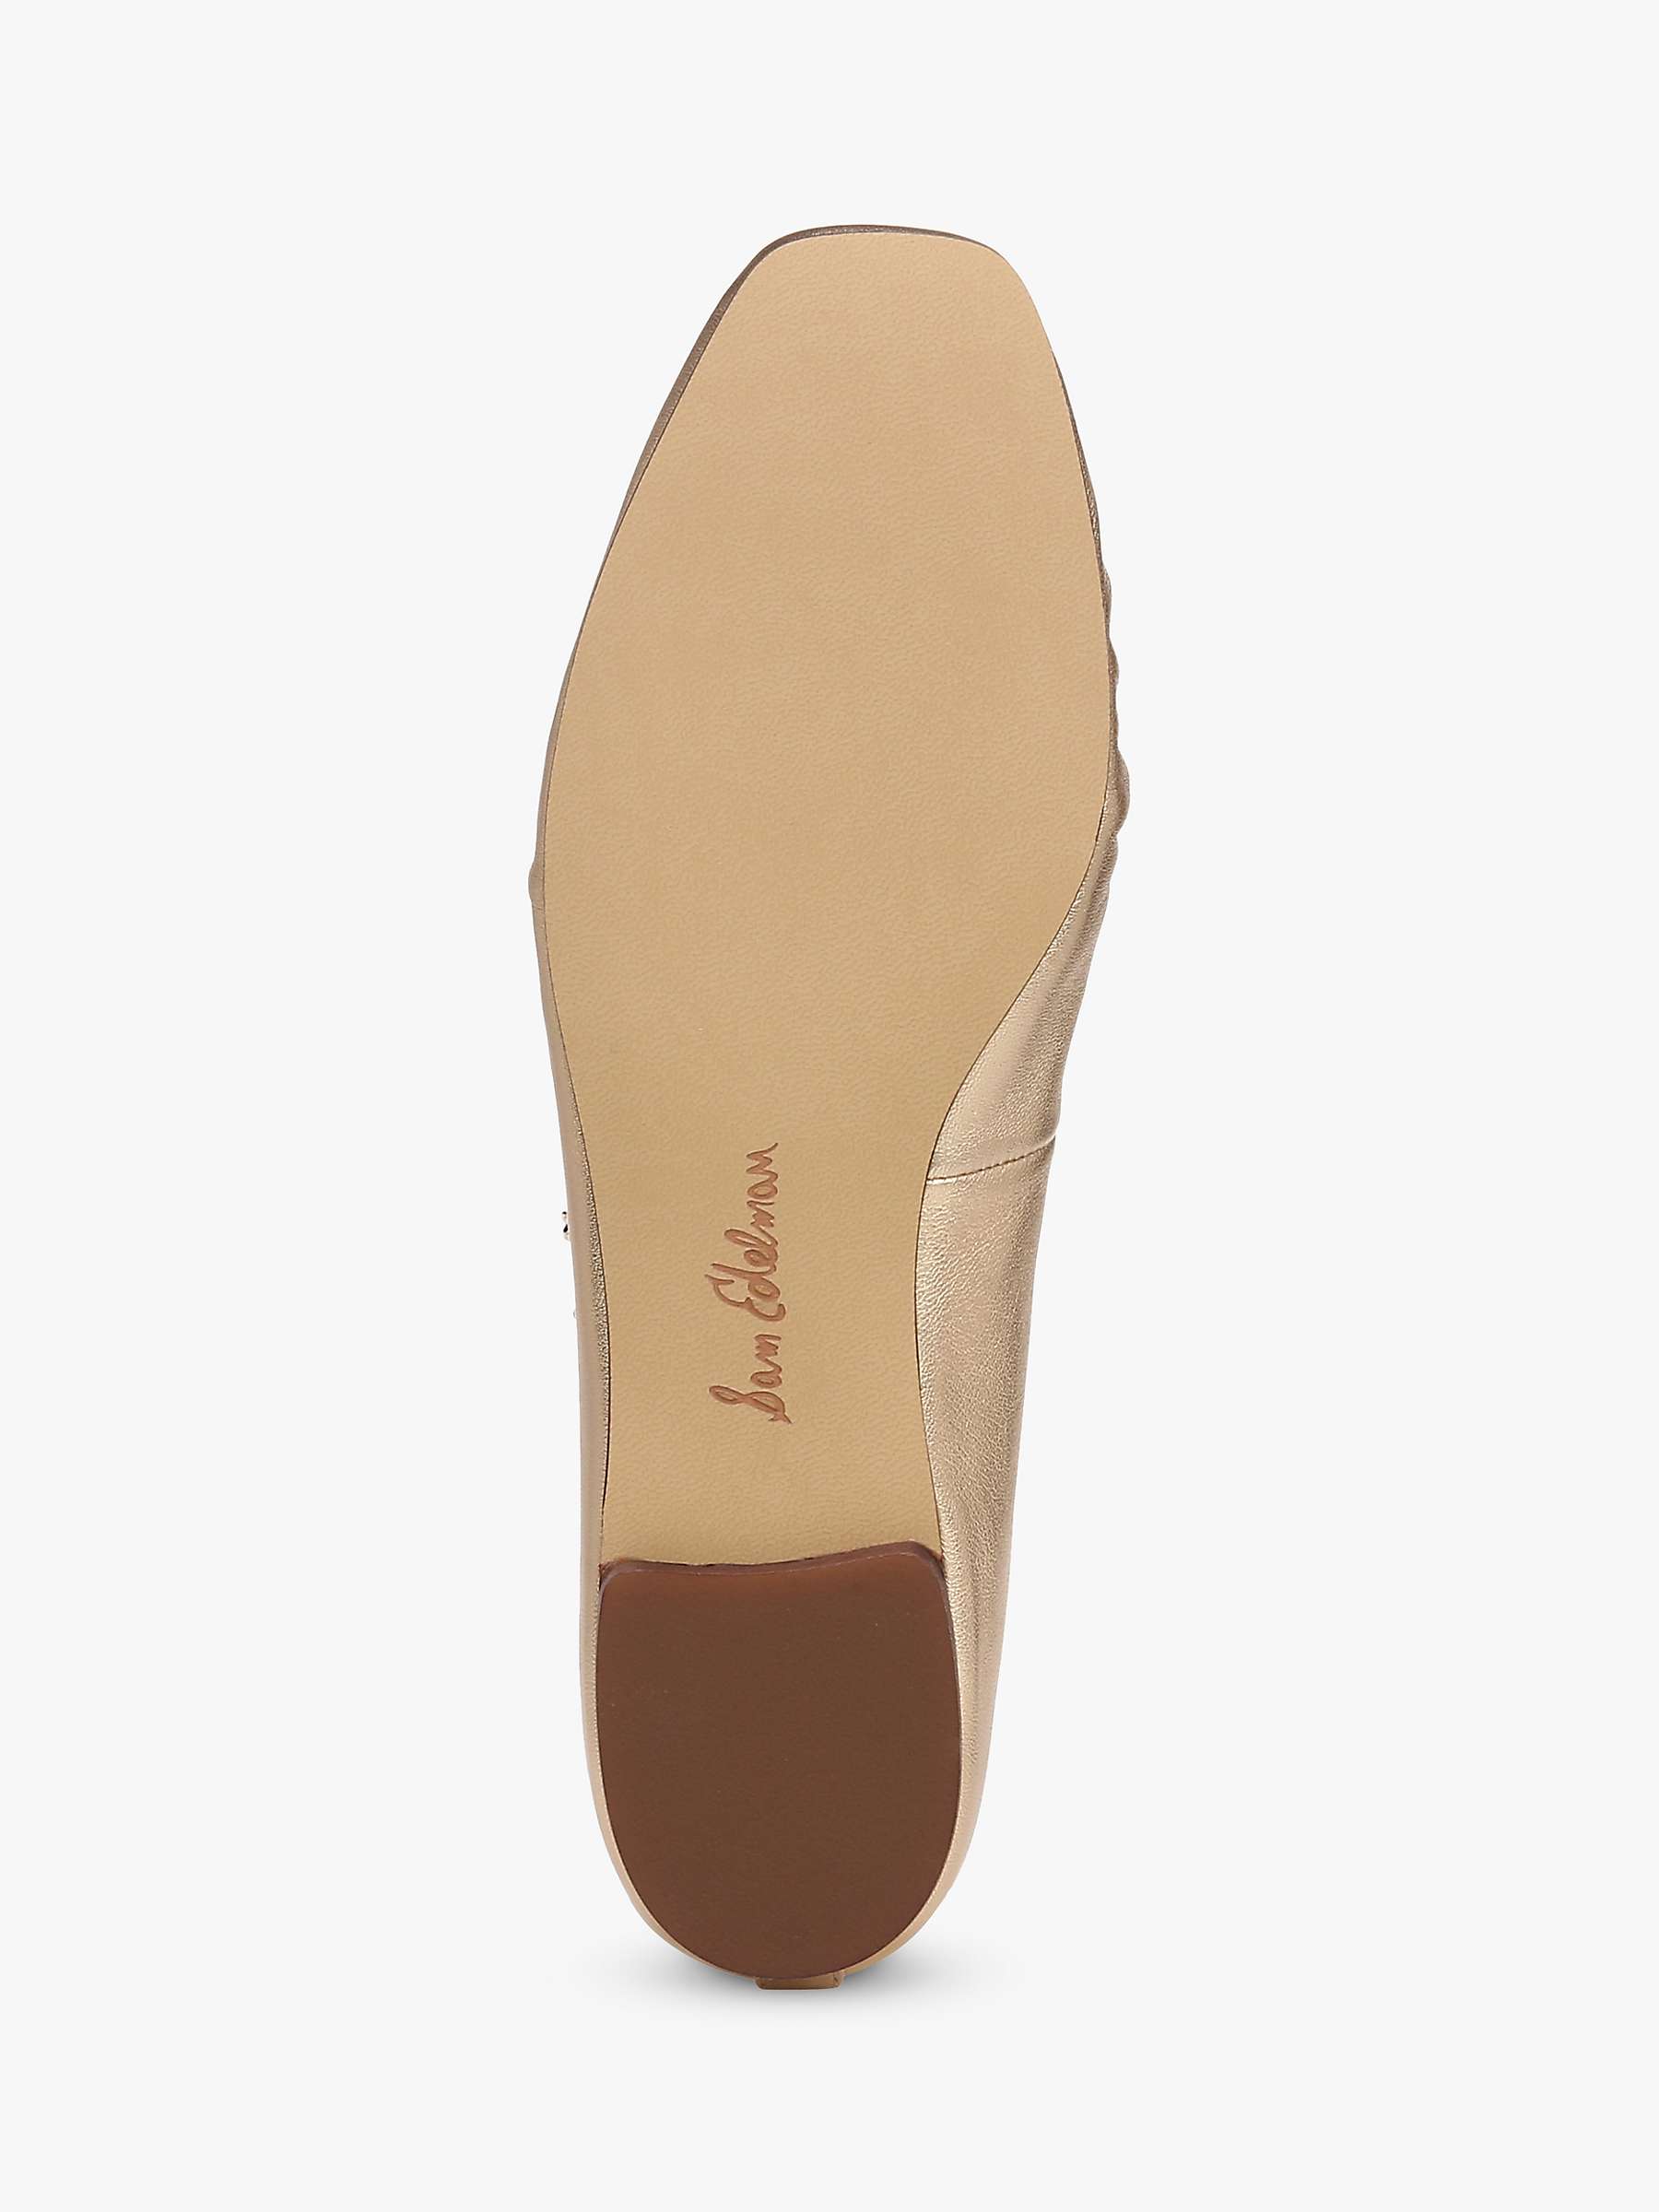 Buy Sam Edelman Micah Leather Mary Jane Shoes Online at johnlewis.com